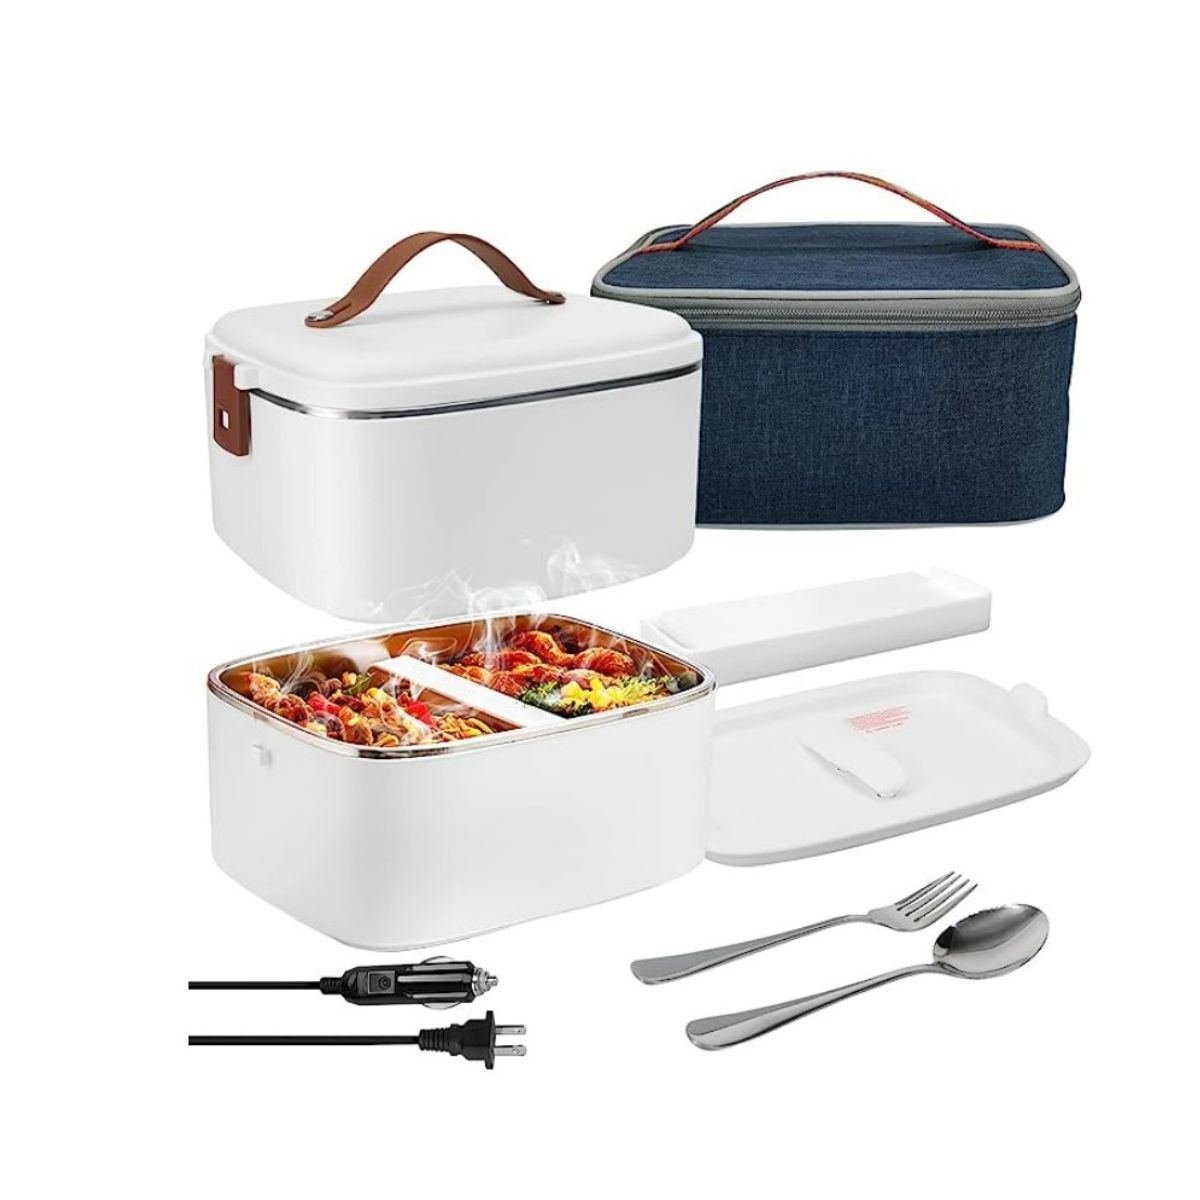 White electric lunch box with blue insulated case. Divider in hot food container.